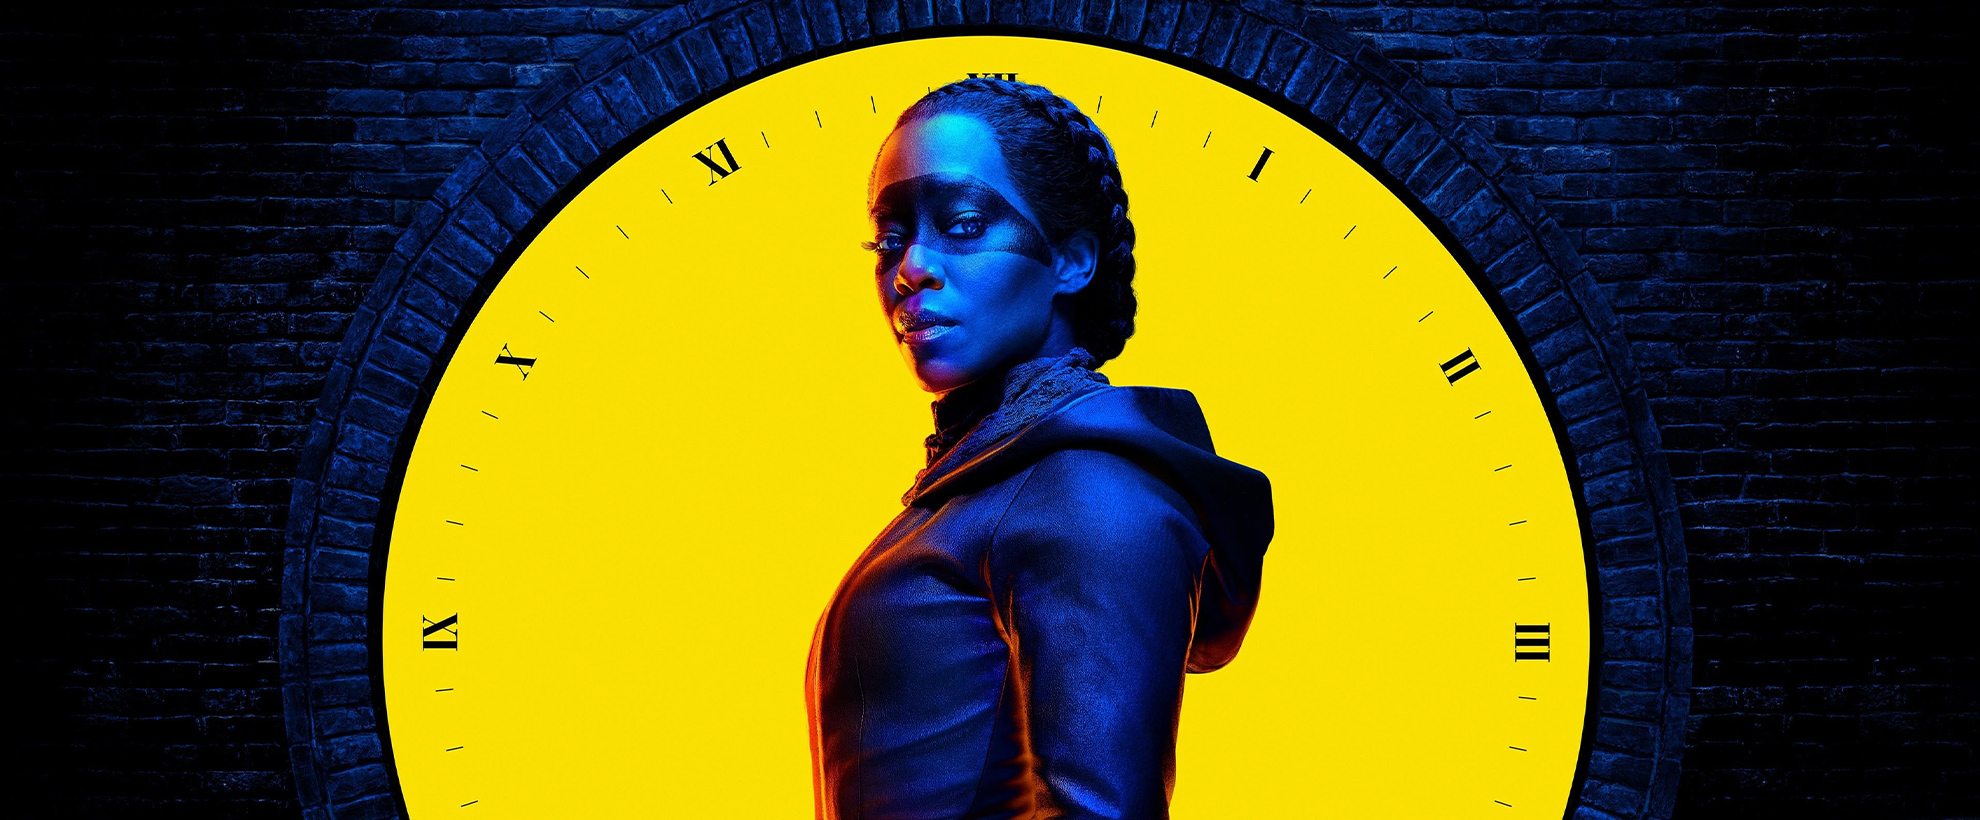 A promotional image of Regina King in Watchmen, in navy light against a bright yellow clock